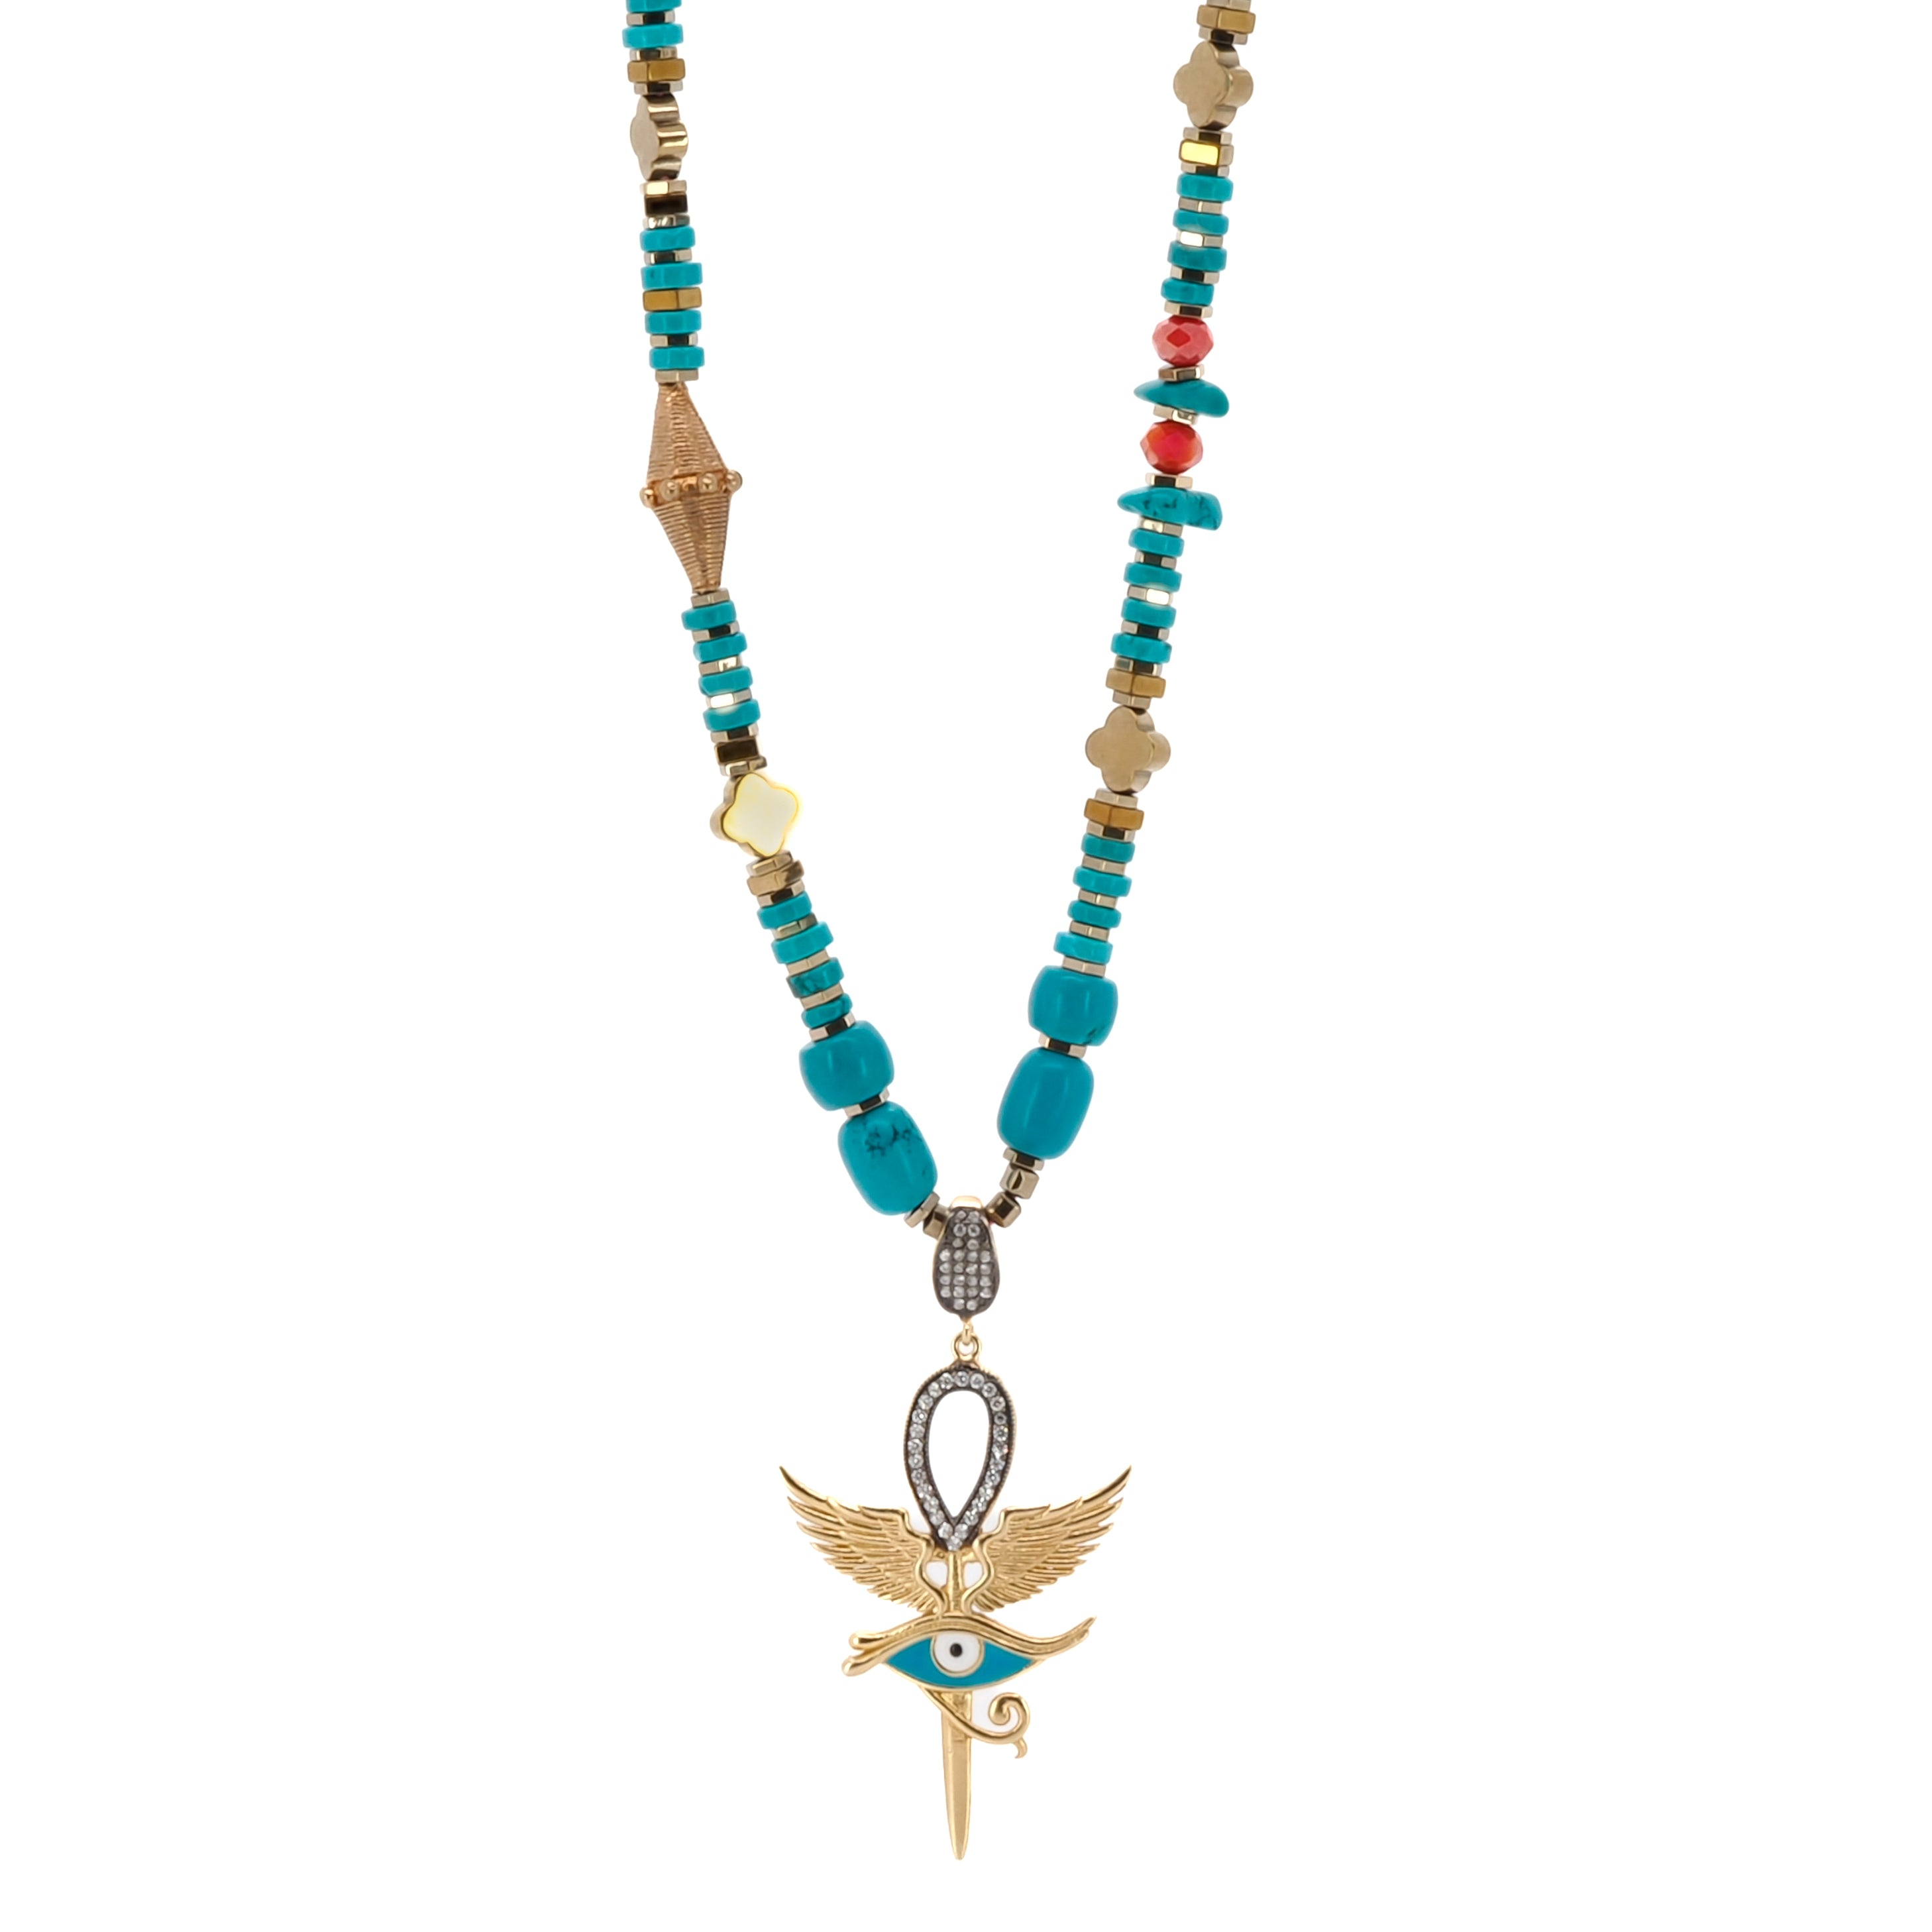 The spiritual significance of the Eye of Horus symbol on the Unique Eye of Horus Turquoise Necklace